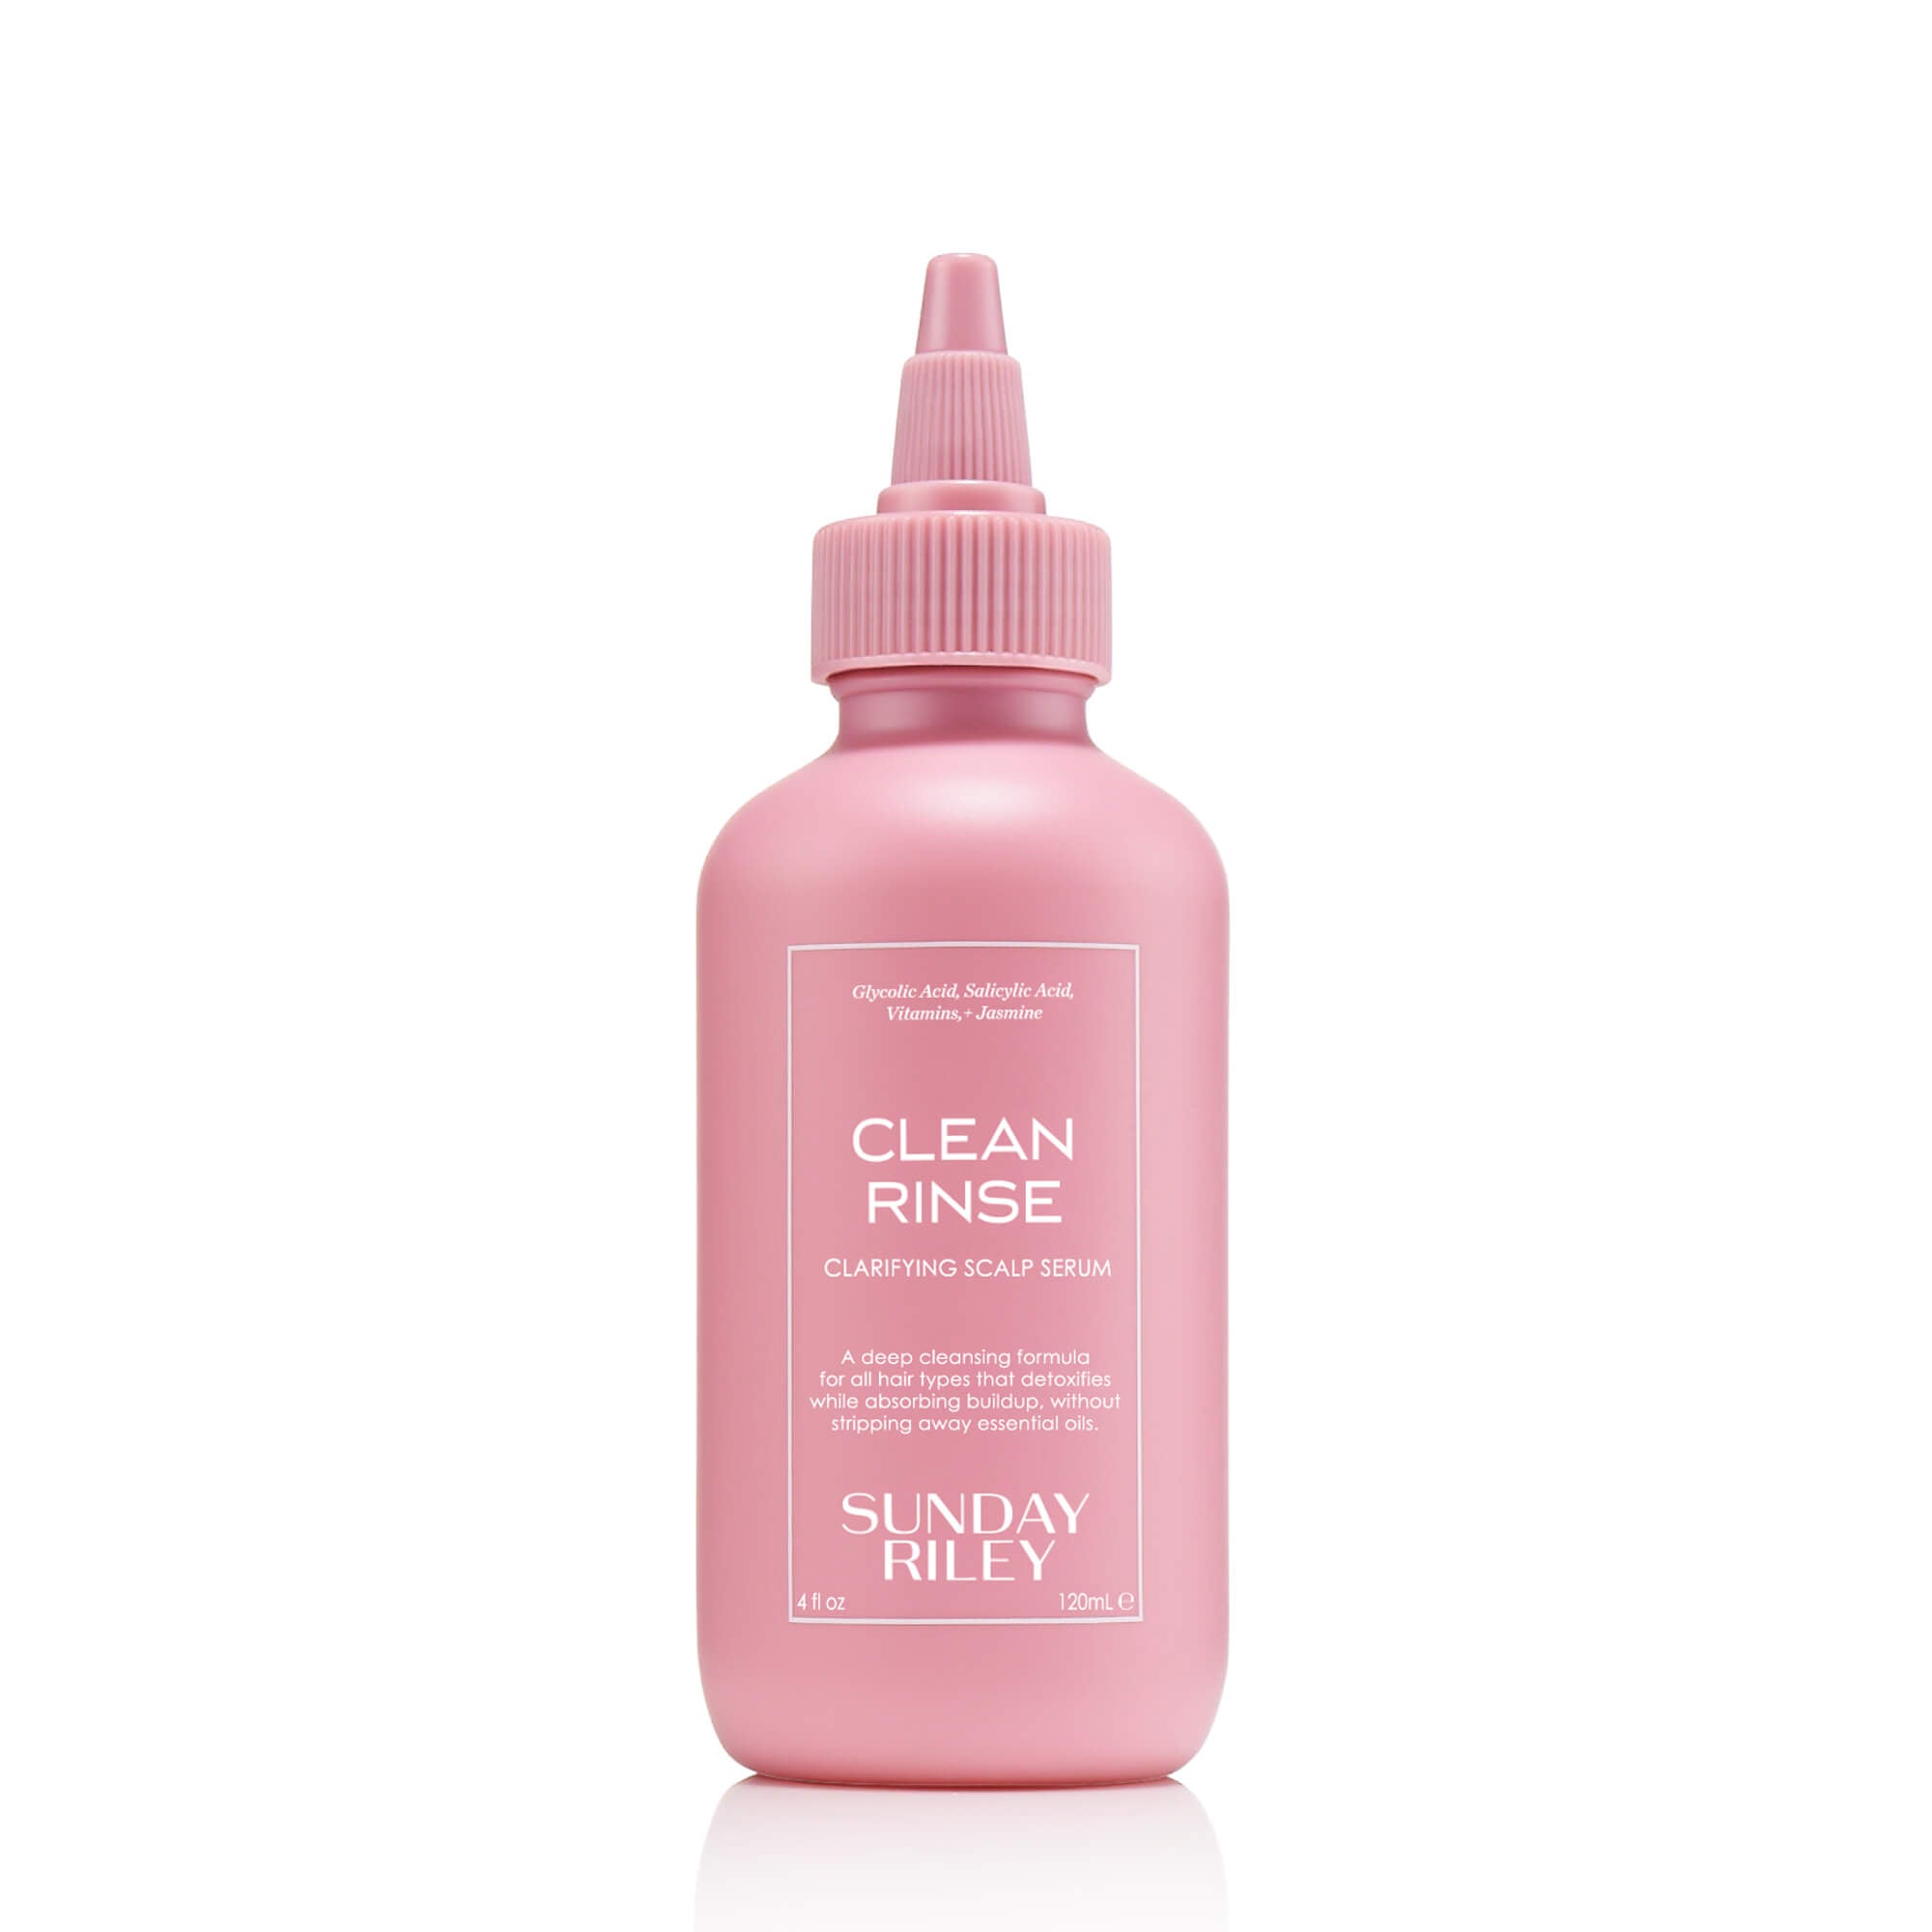 Clean Rinse Clarifying Scalp Serum with Niacinamide